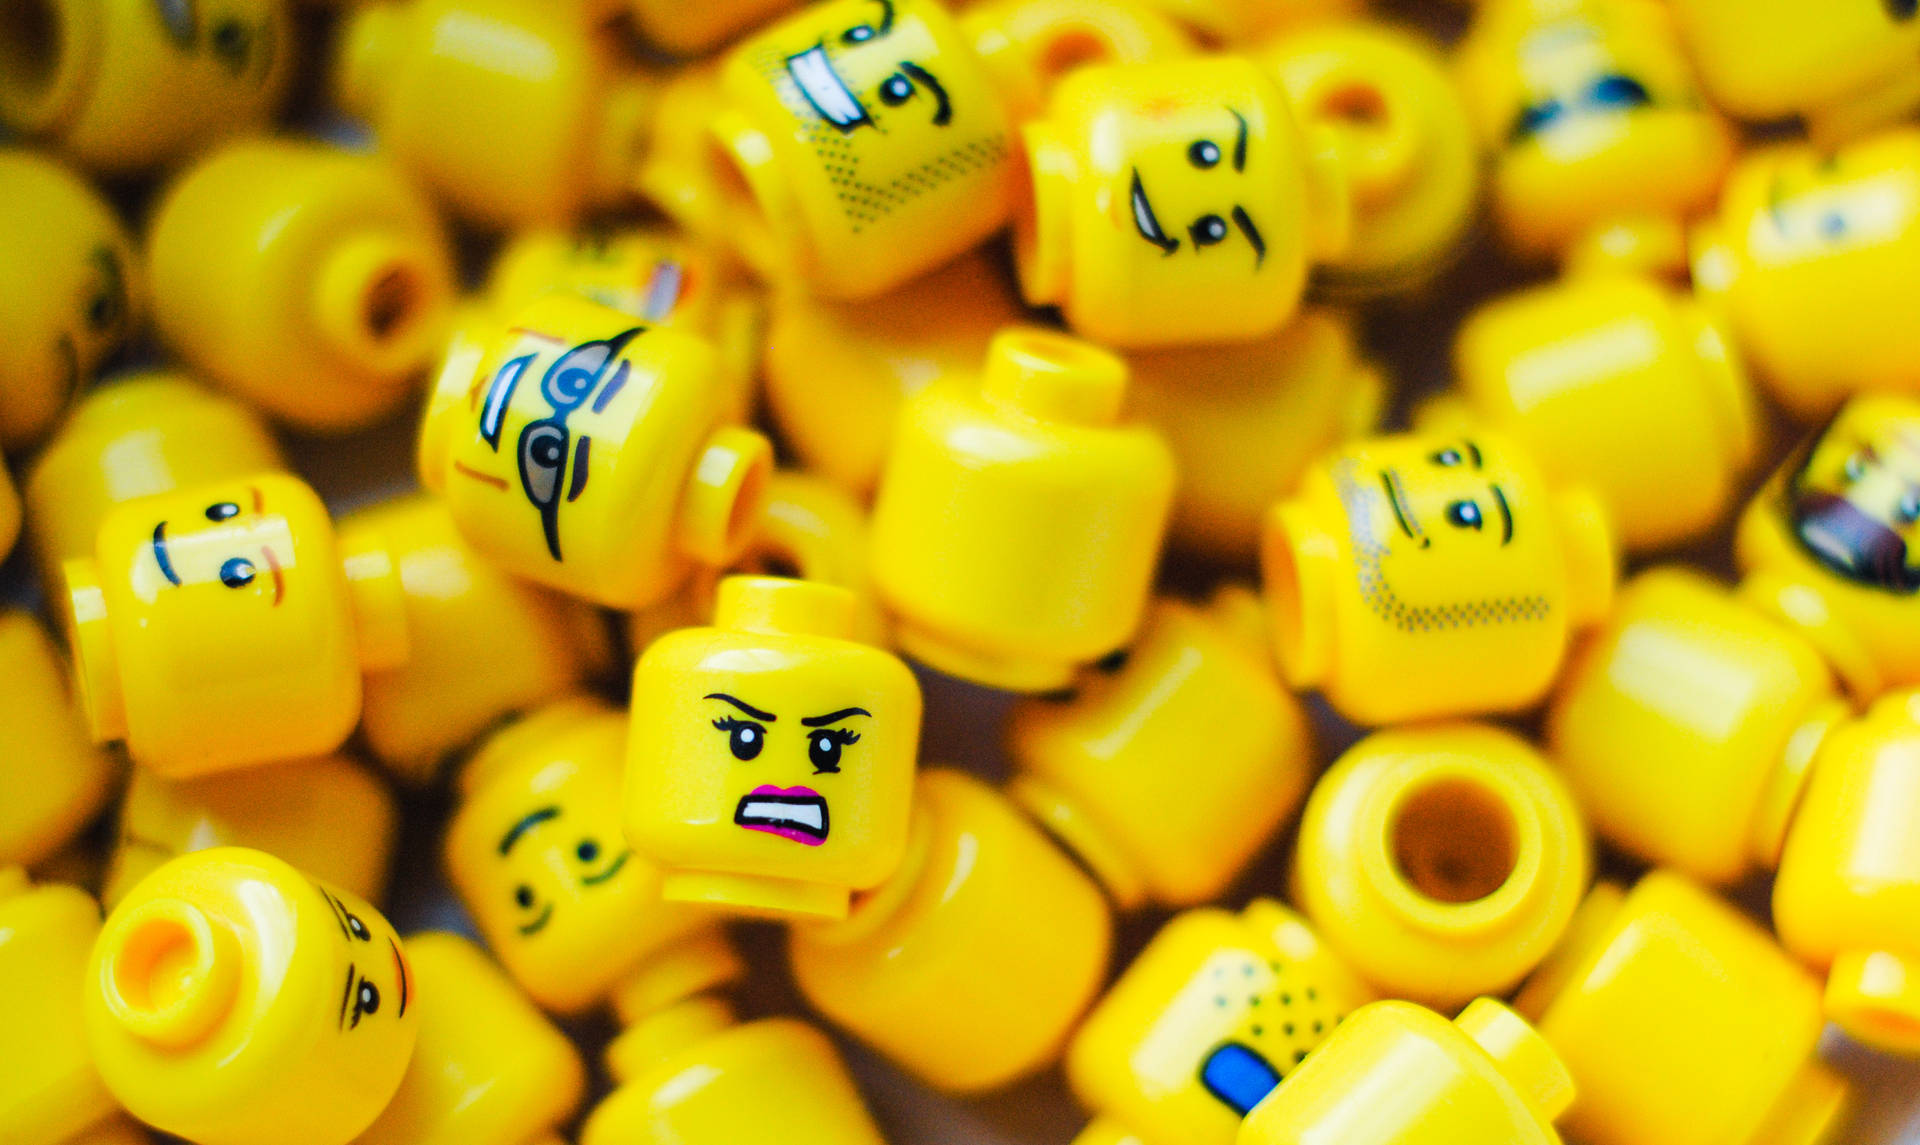 Lego 3430X2045 Wallpaper and Background Image